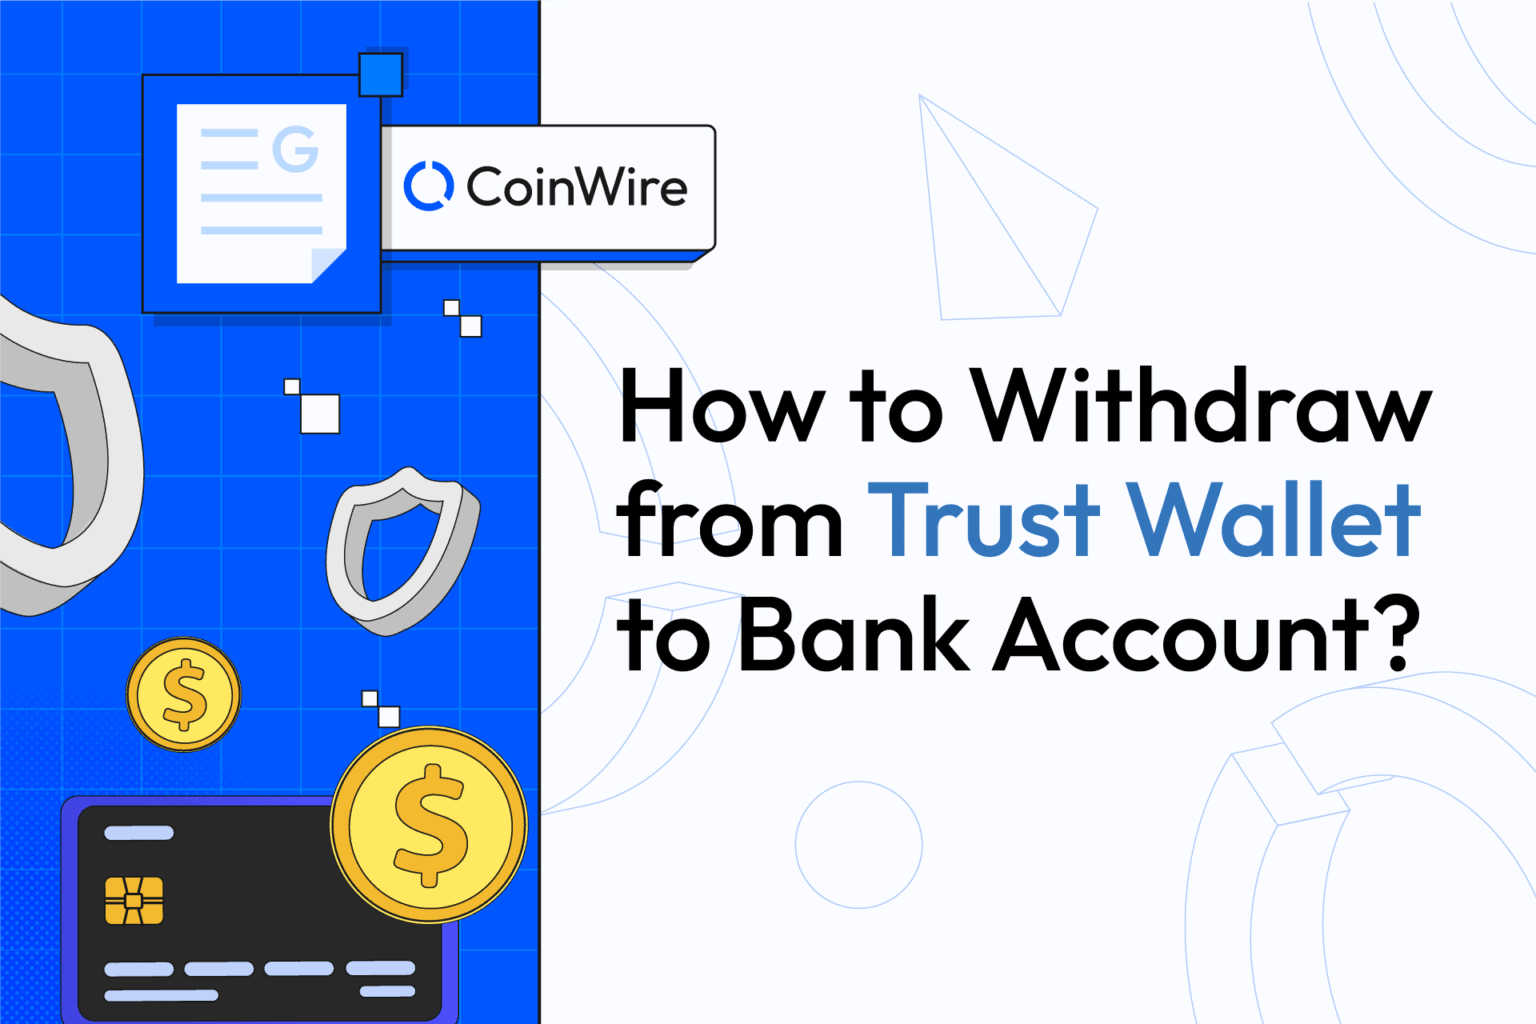 withdraw from crypto.com to trust wallet